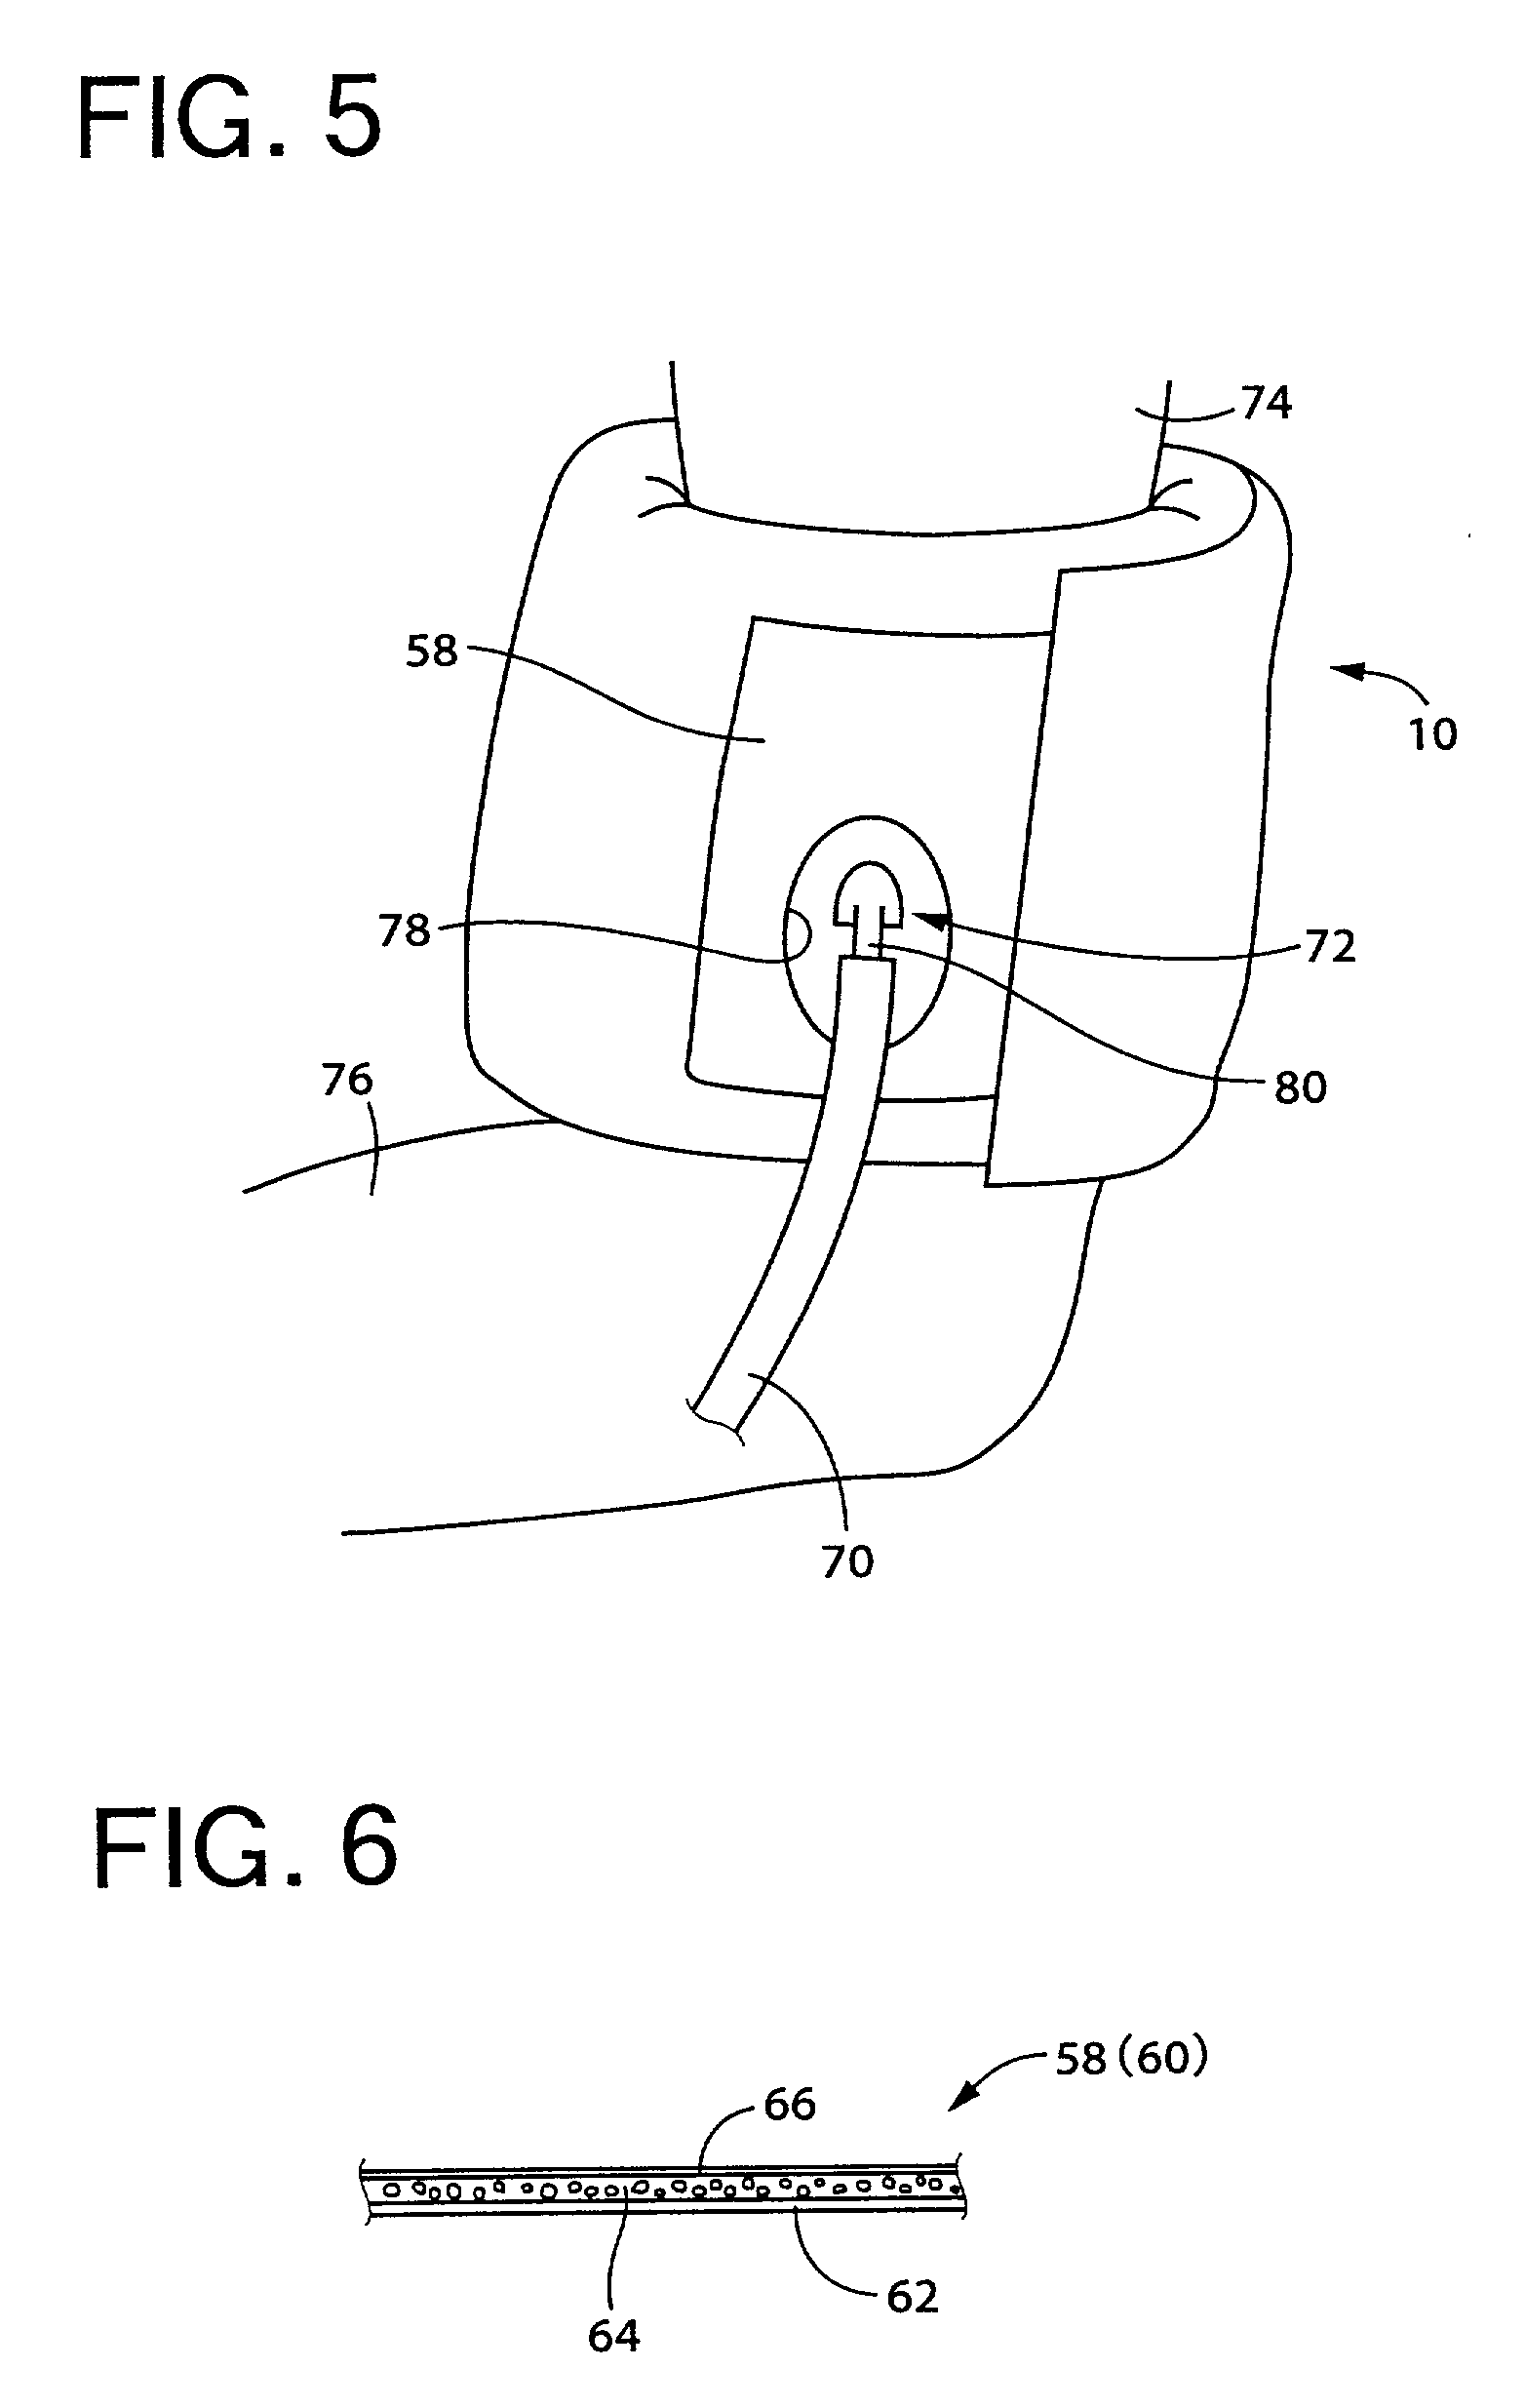 Inflatable cuff used for blood pressure measurement